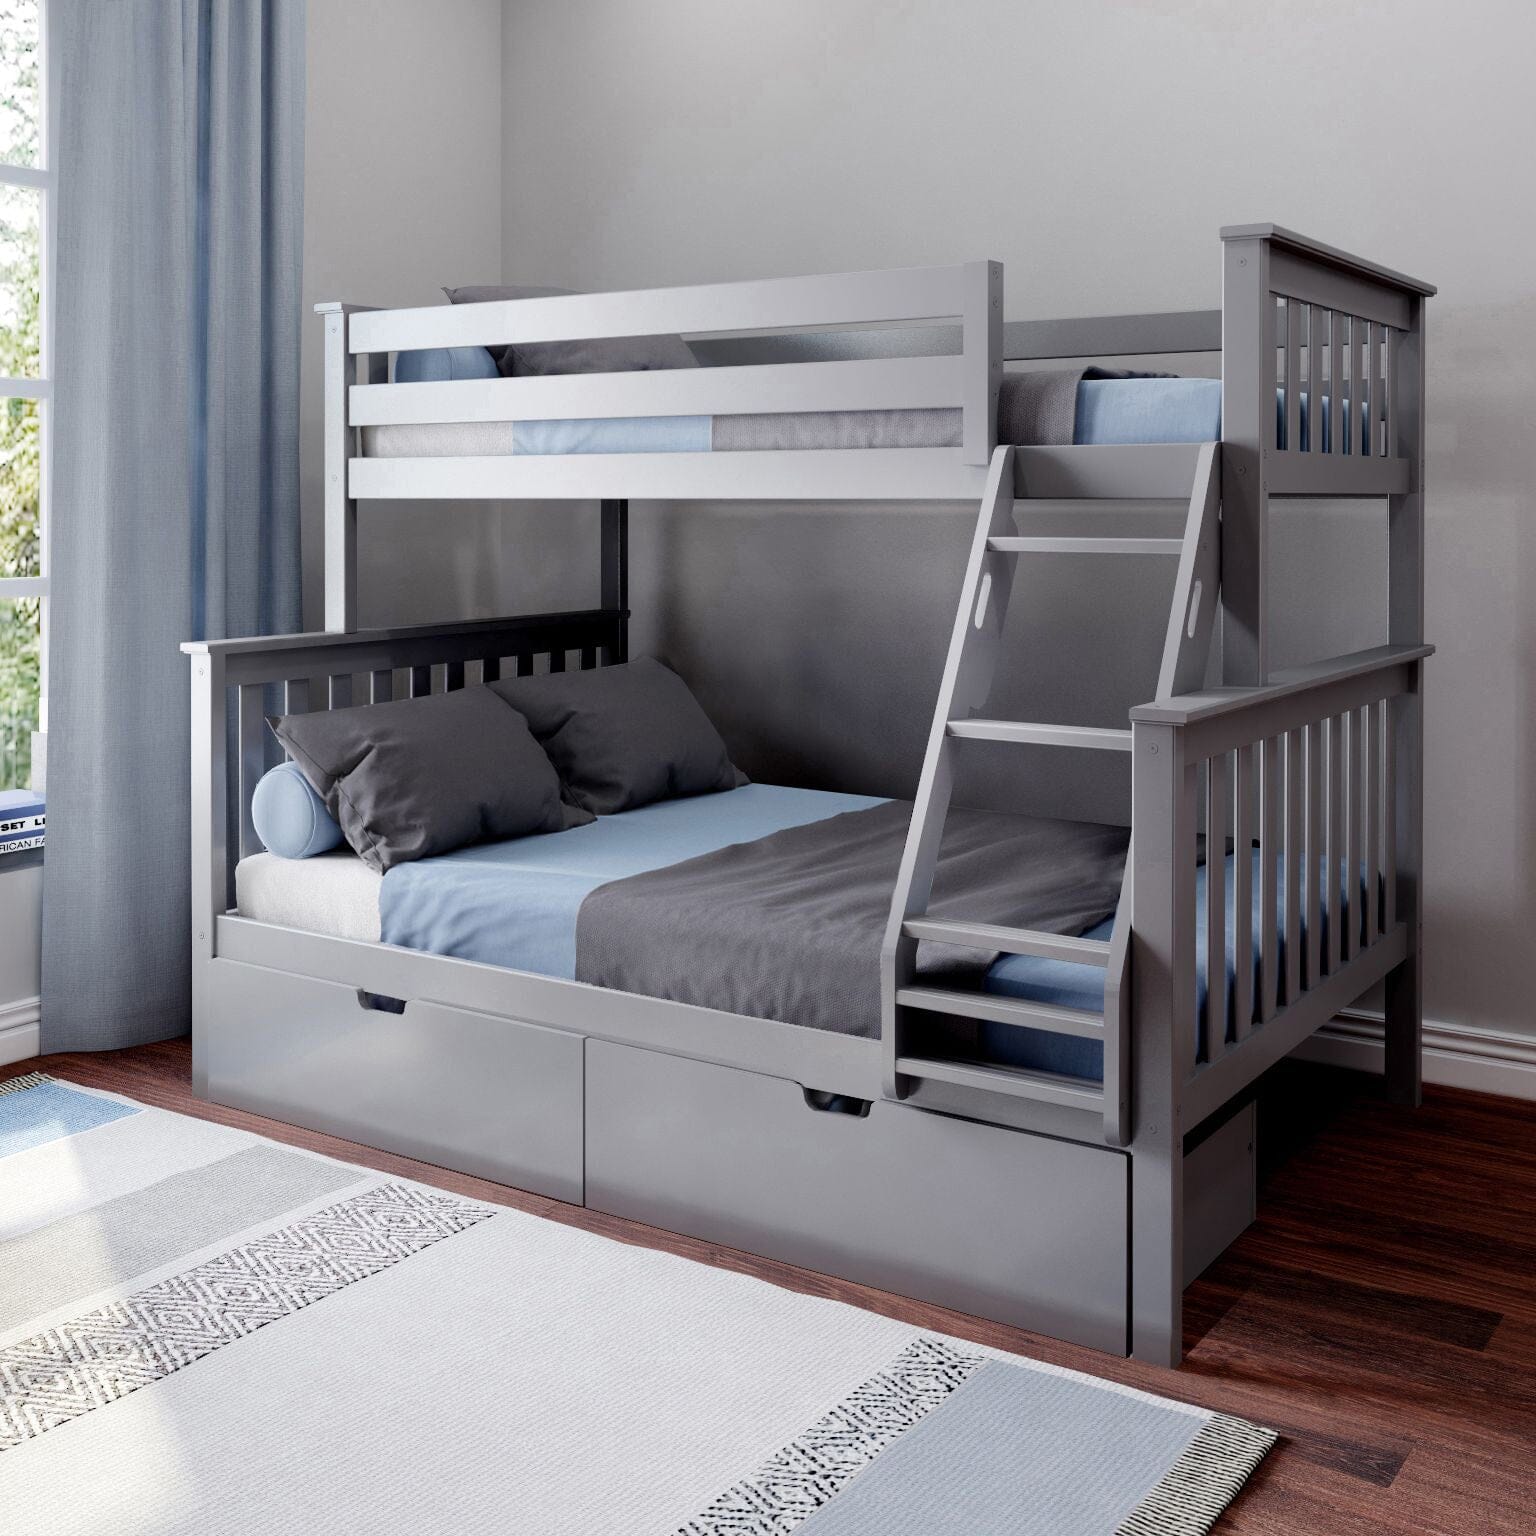 Image of Kid's Twin Over Full-Size Bunk Bed with Storage Drawers